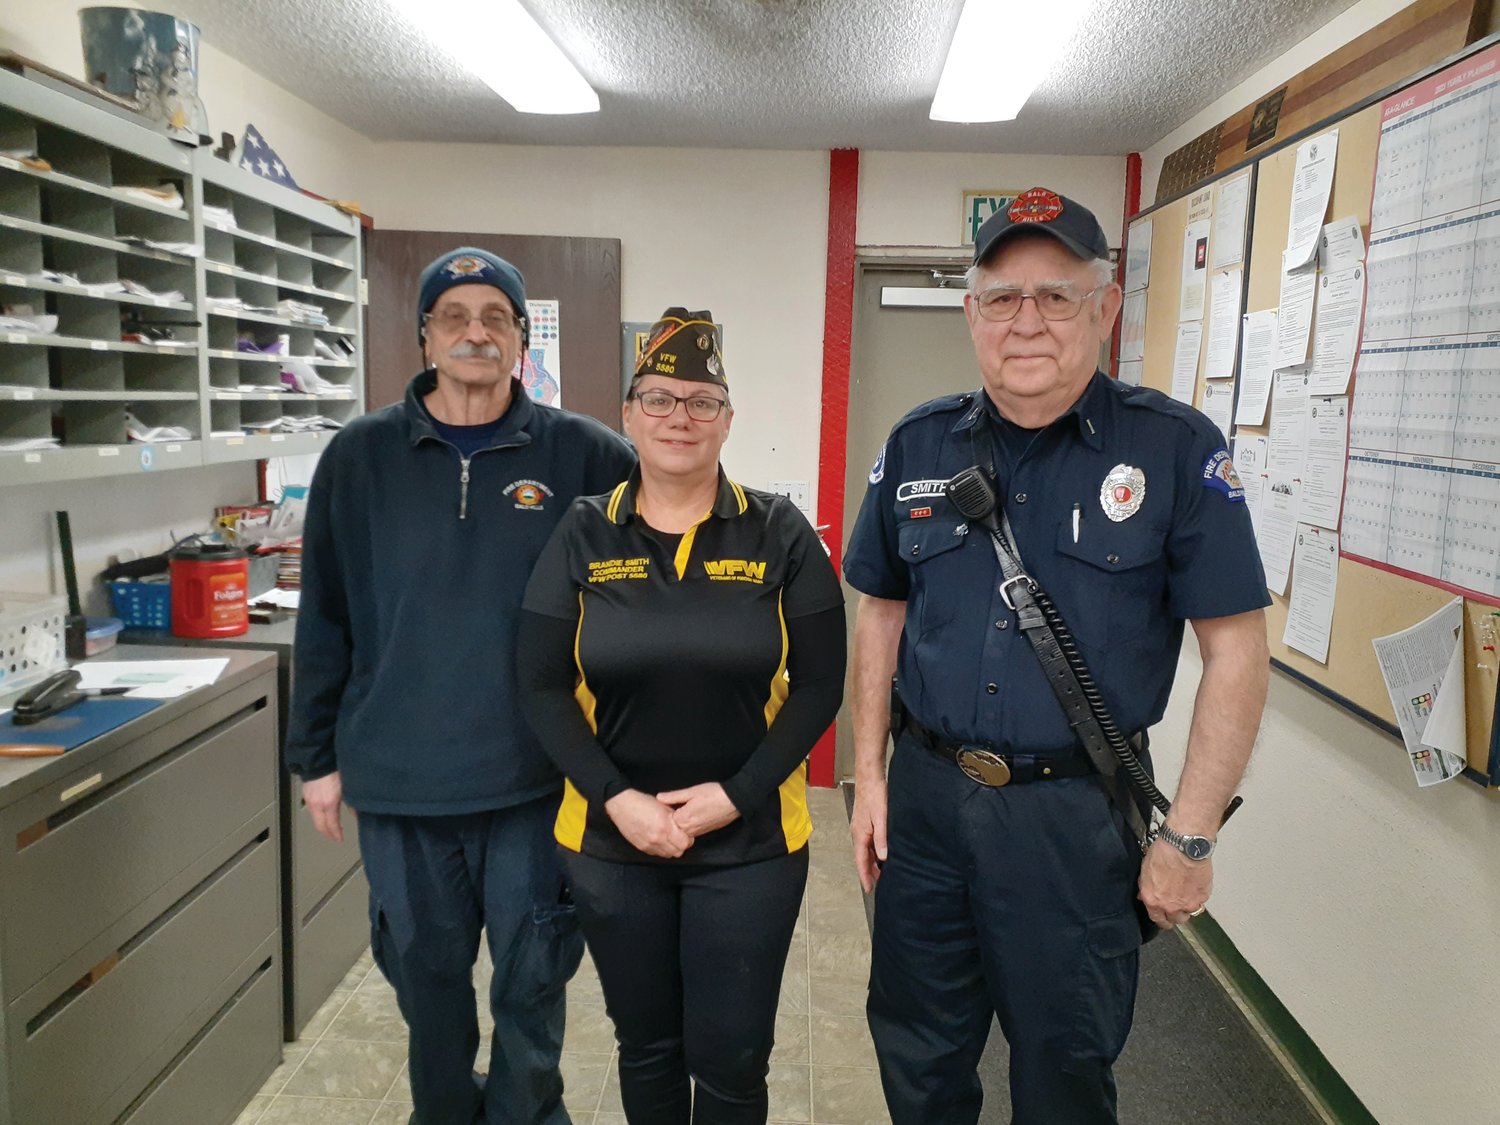 Bald Hills Fire District volunteers Mark Edwards and Ron Smith pose for a photo with Brandi Smith, the commander of VFW Post 5580, after they received their awards.